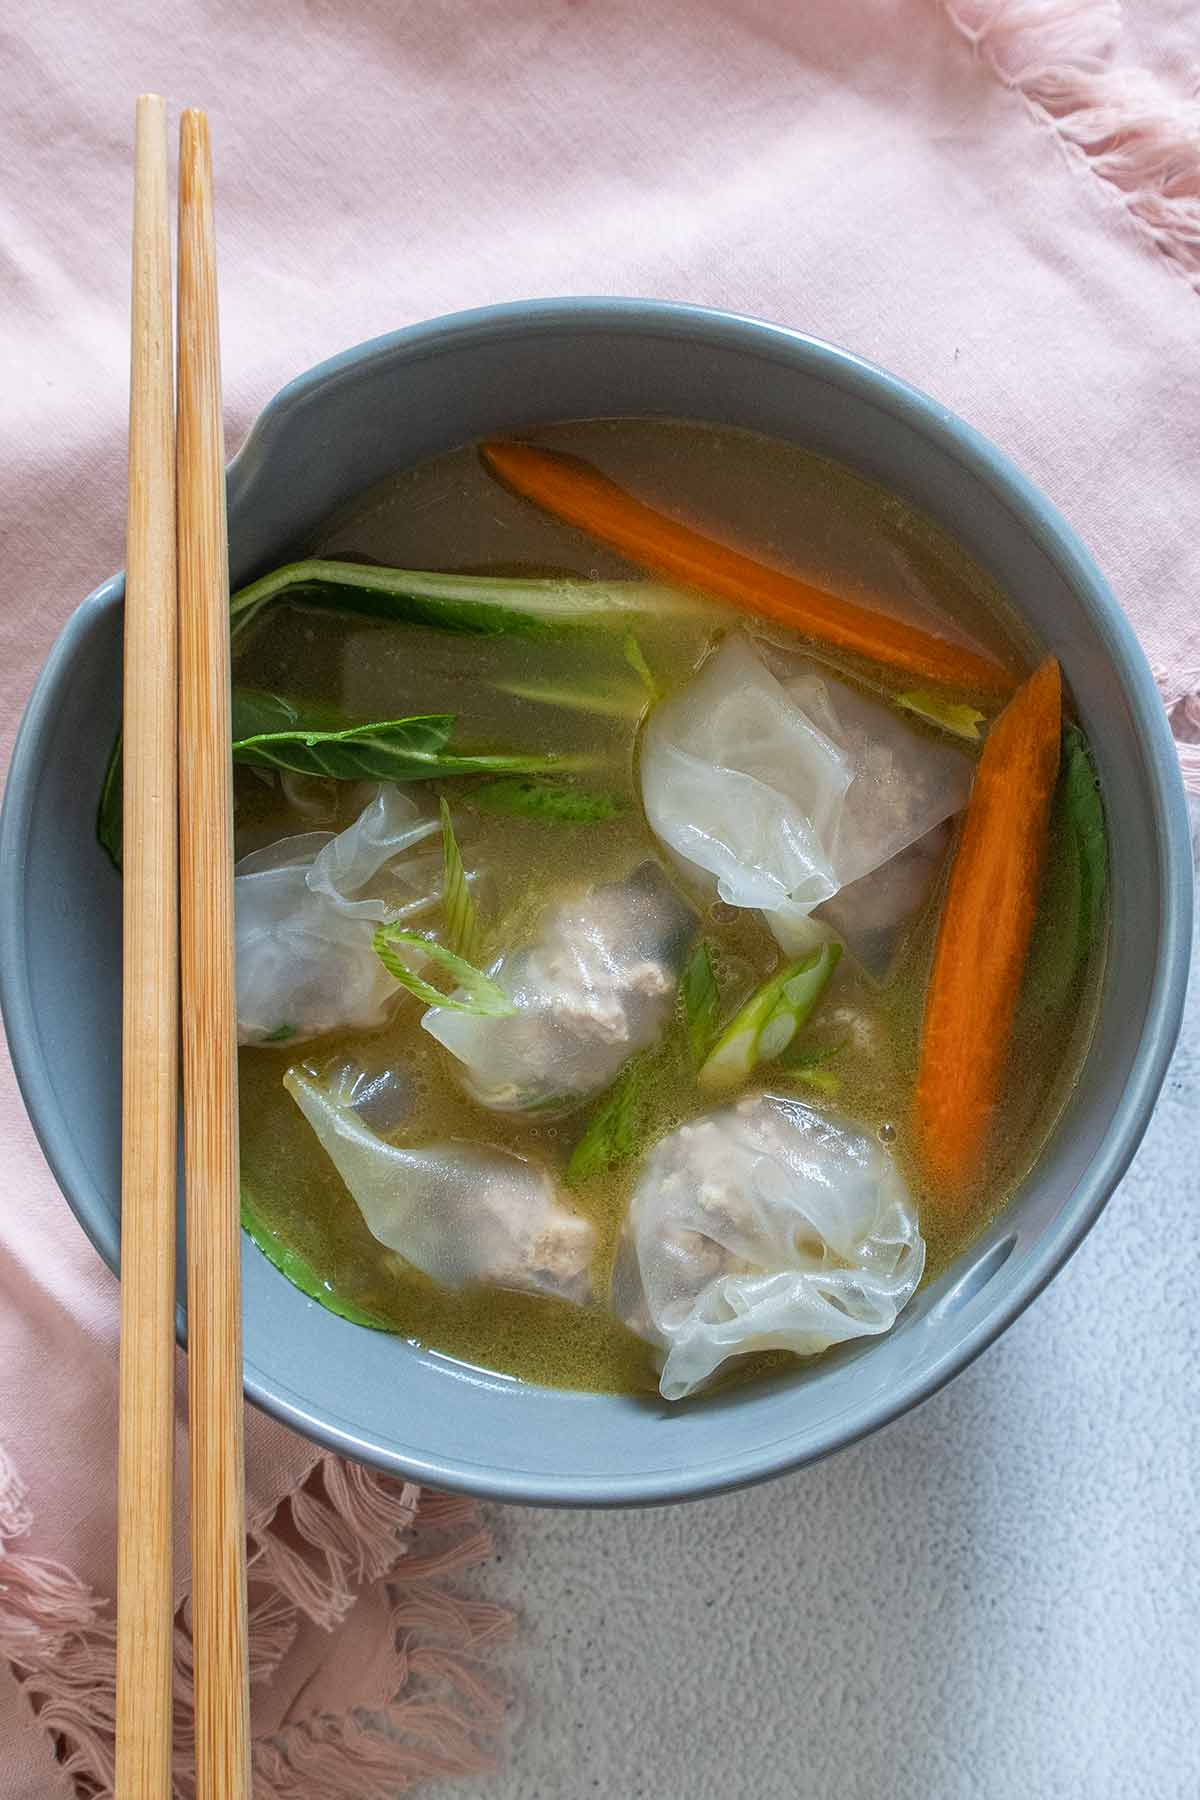 wonton soup with dumplings, bok choy and carrots in a bowl with chopsticks